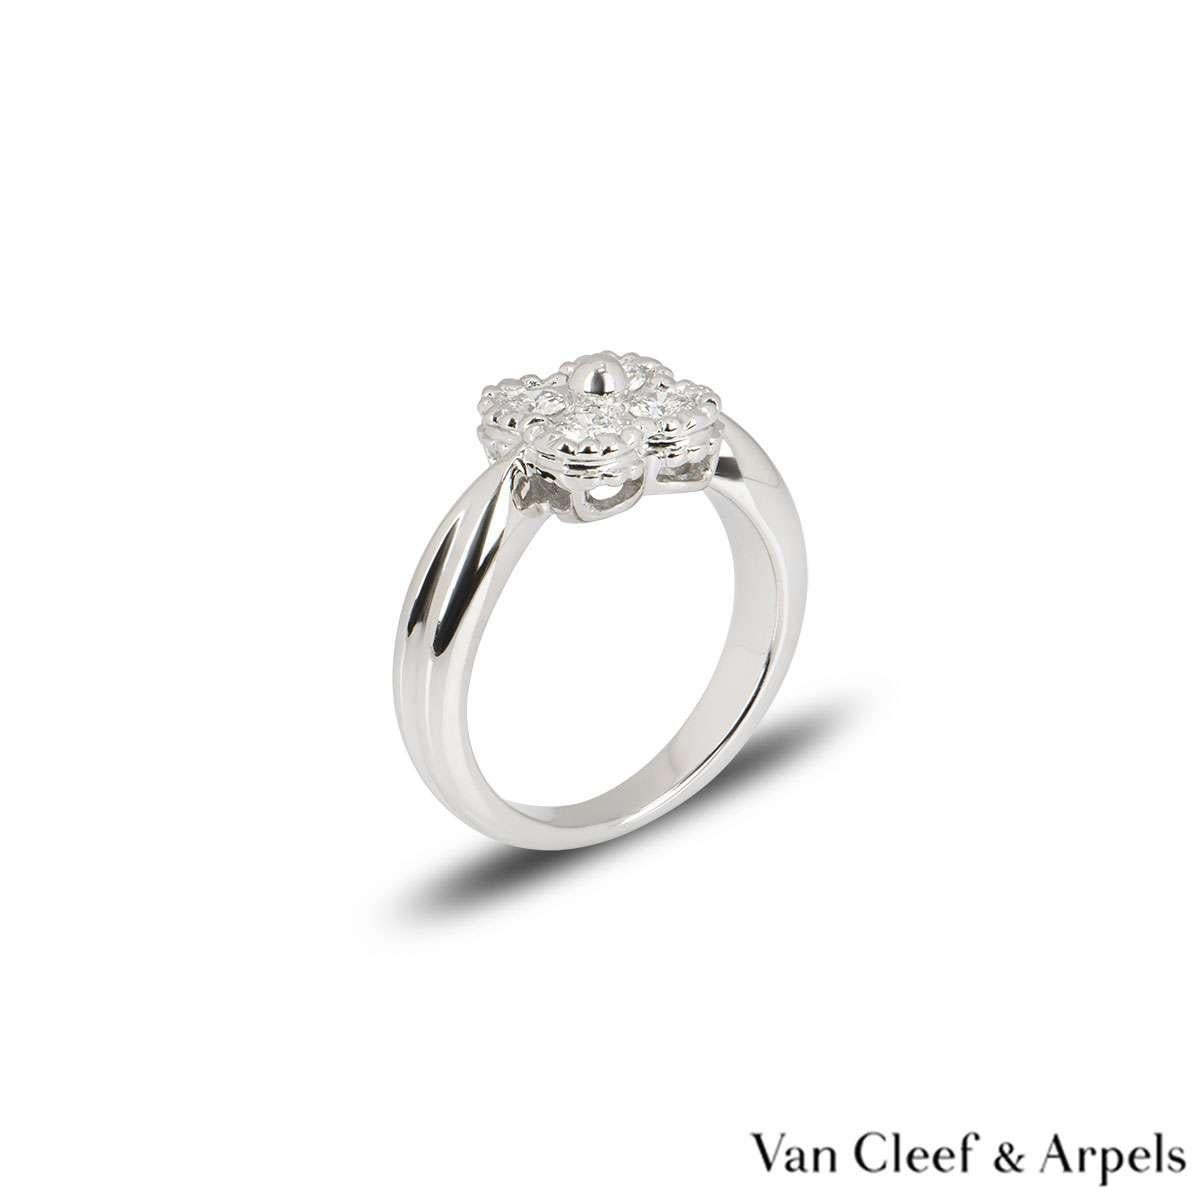 A lovely 18k white gold Van Cleef & Arpels diamond ring from the Alhambra collection. The central flower motif is set with 4 round round brilliant cut diamonds in a pave setting weighing approximately 0.28ct. The ring is currently a size UK E / EU